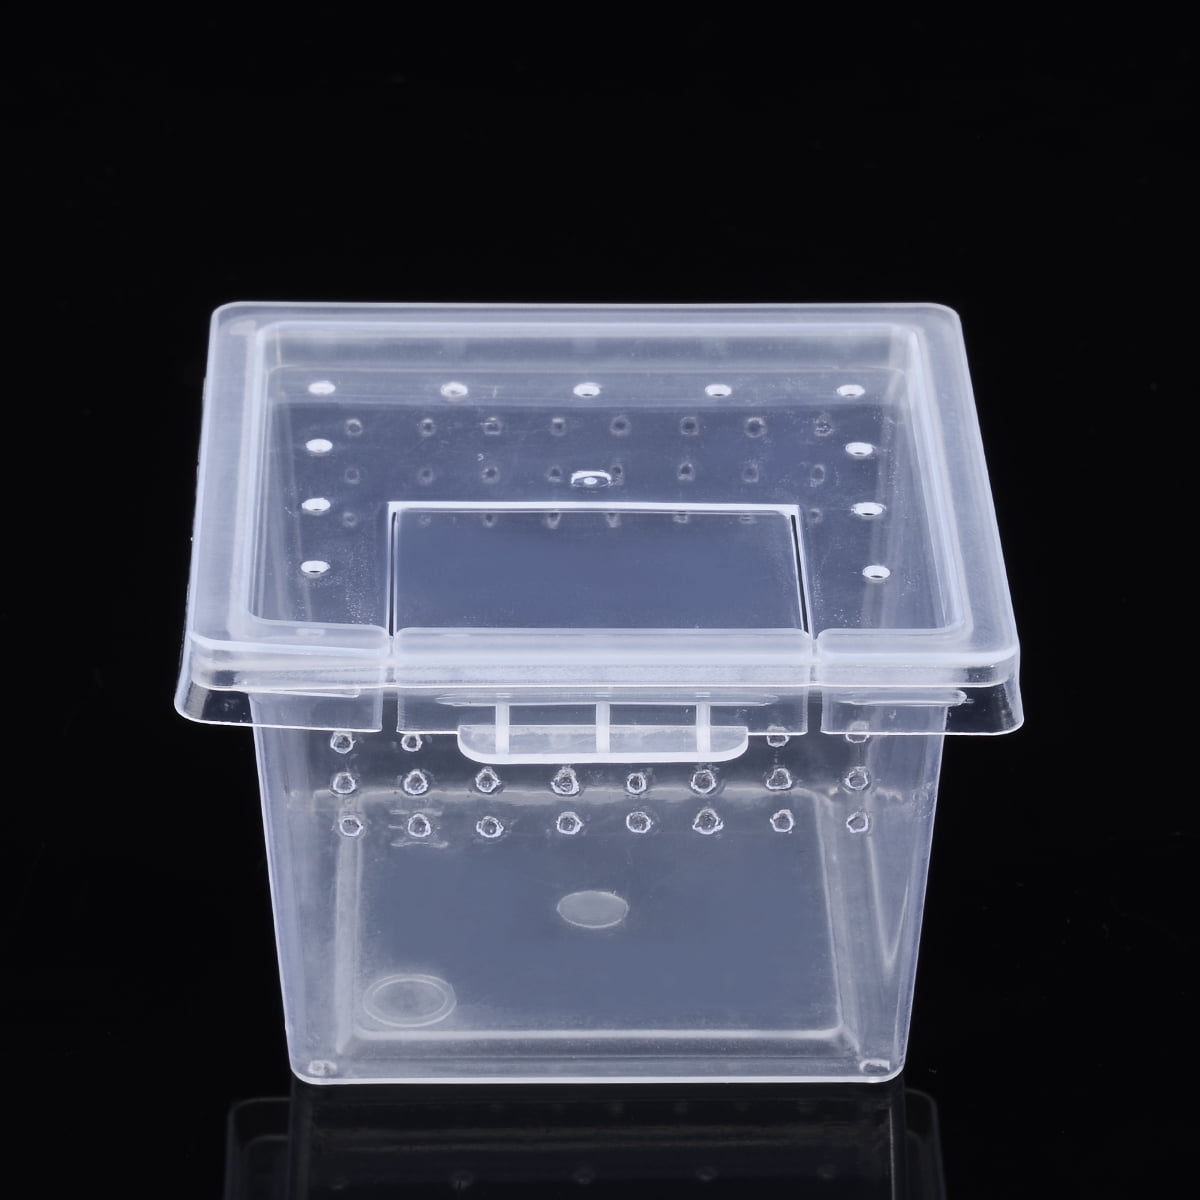 Clear Plastic Reptile Insect Box Spider Snake Transport Breeding Feeding Case 